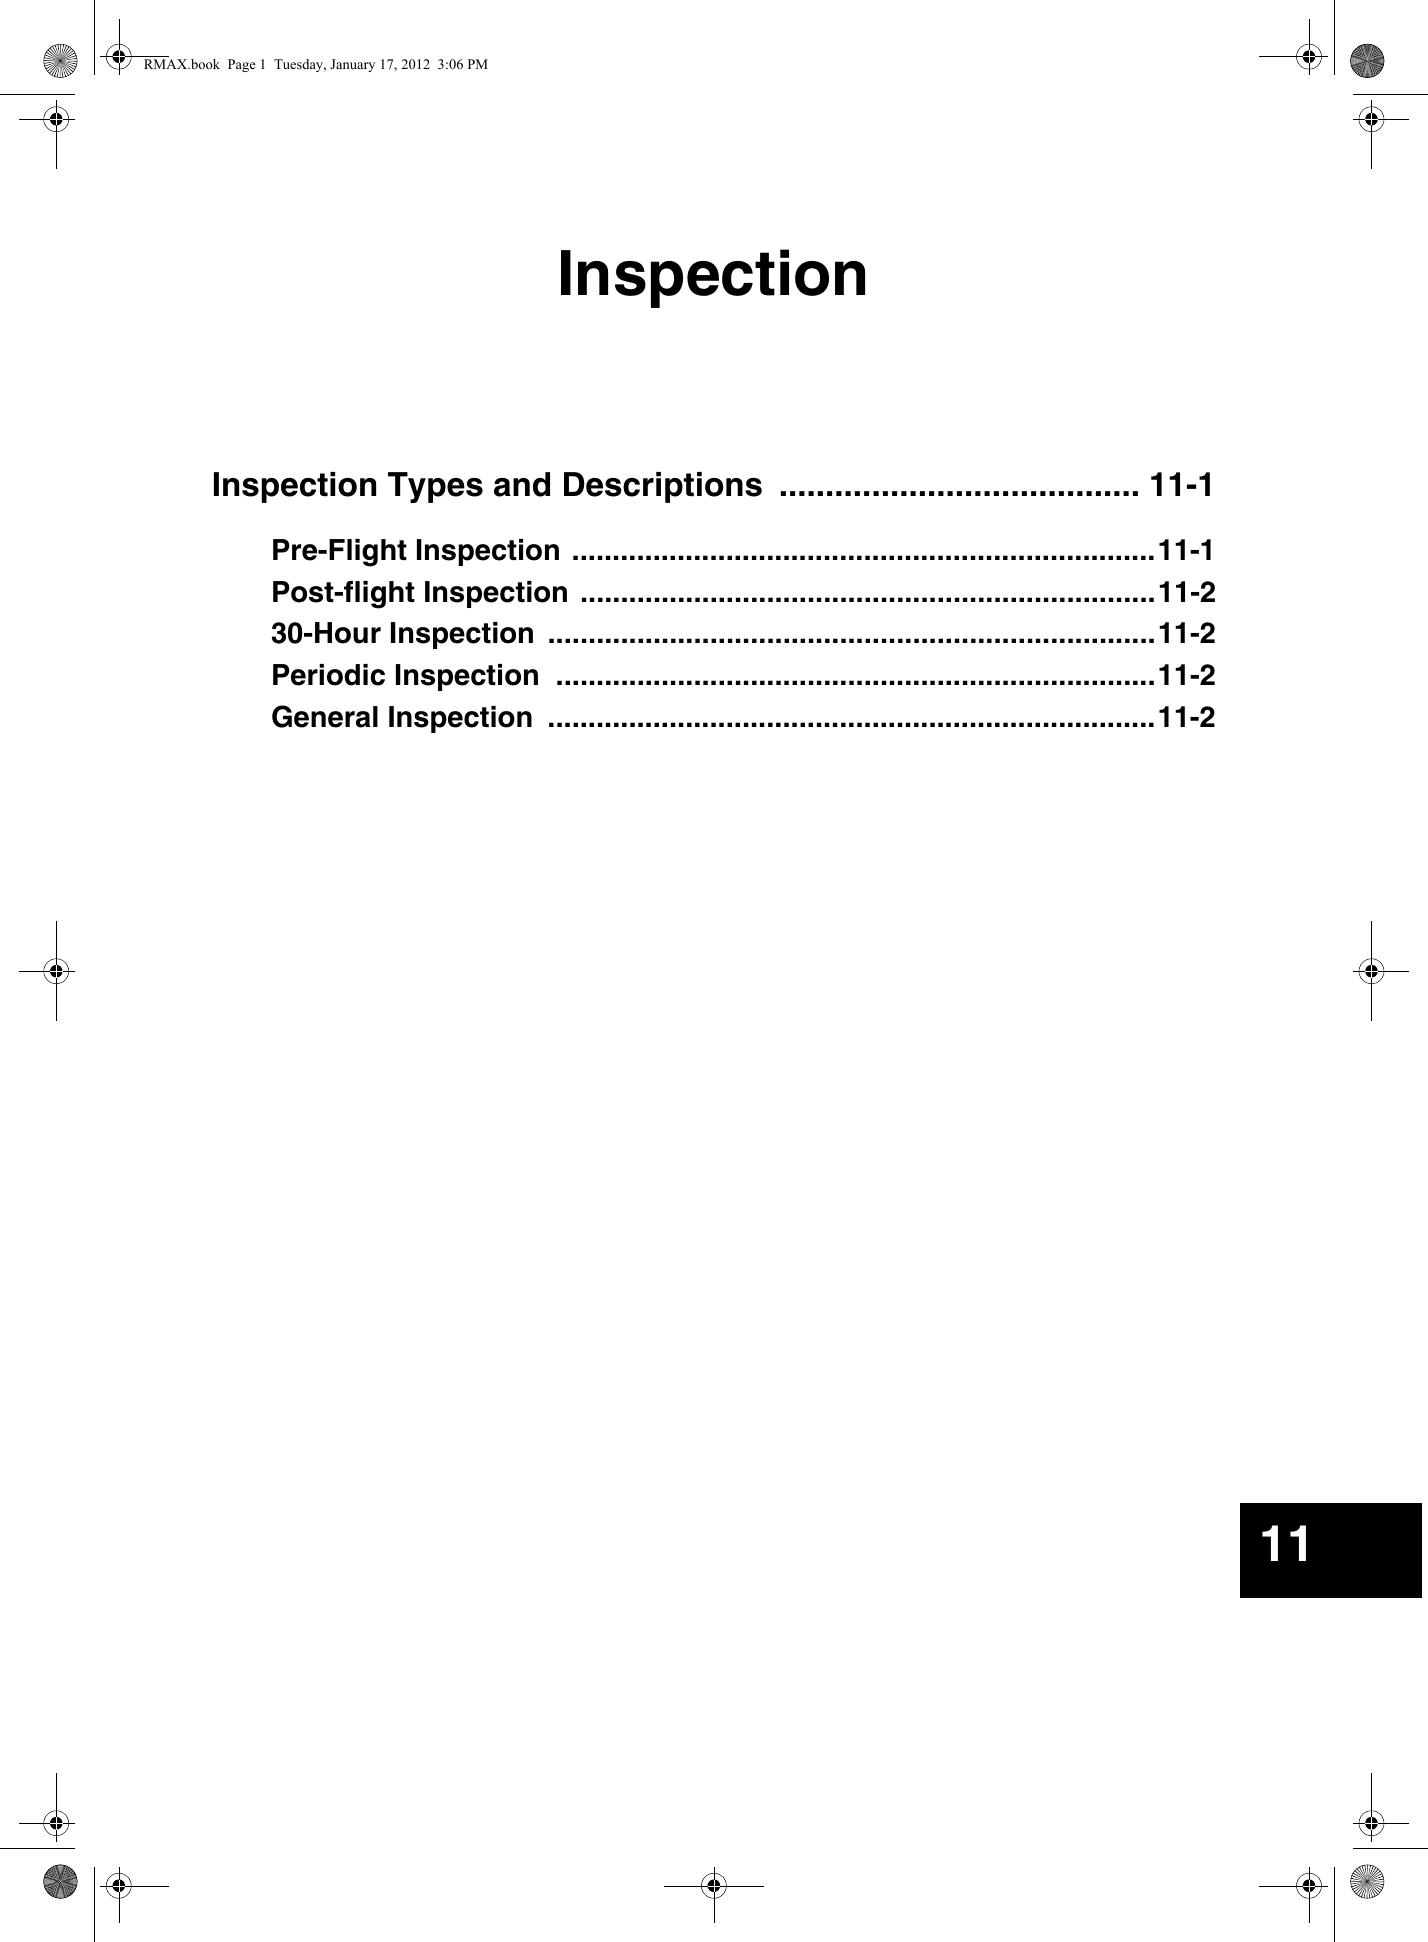 InspectionInspection Types and Descriptions  ....................................... 11-1Pre-Flight Inspection ........................................................................11-1Post-flight Inspection .......................................................................11-230-Hour Inspection  ...........................................................................11-2Periodic Inspection  ..........................................................................11-2General Inspection  ...........................................................................11-211RMAX.book  Page 1  Tuesday, January 17, 2012  3:06 PM